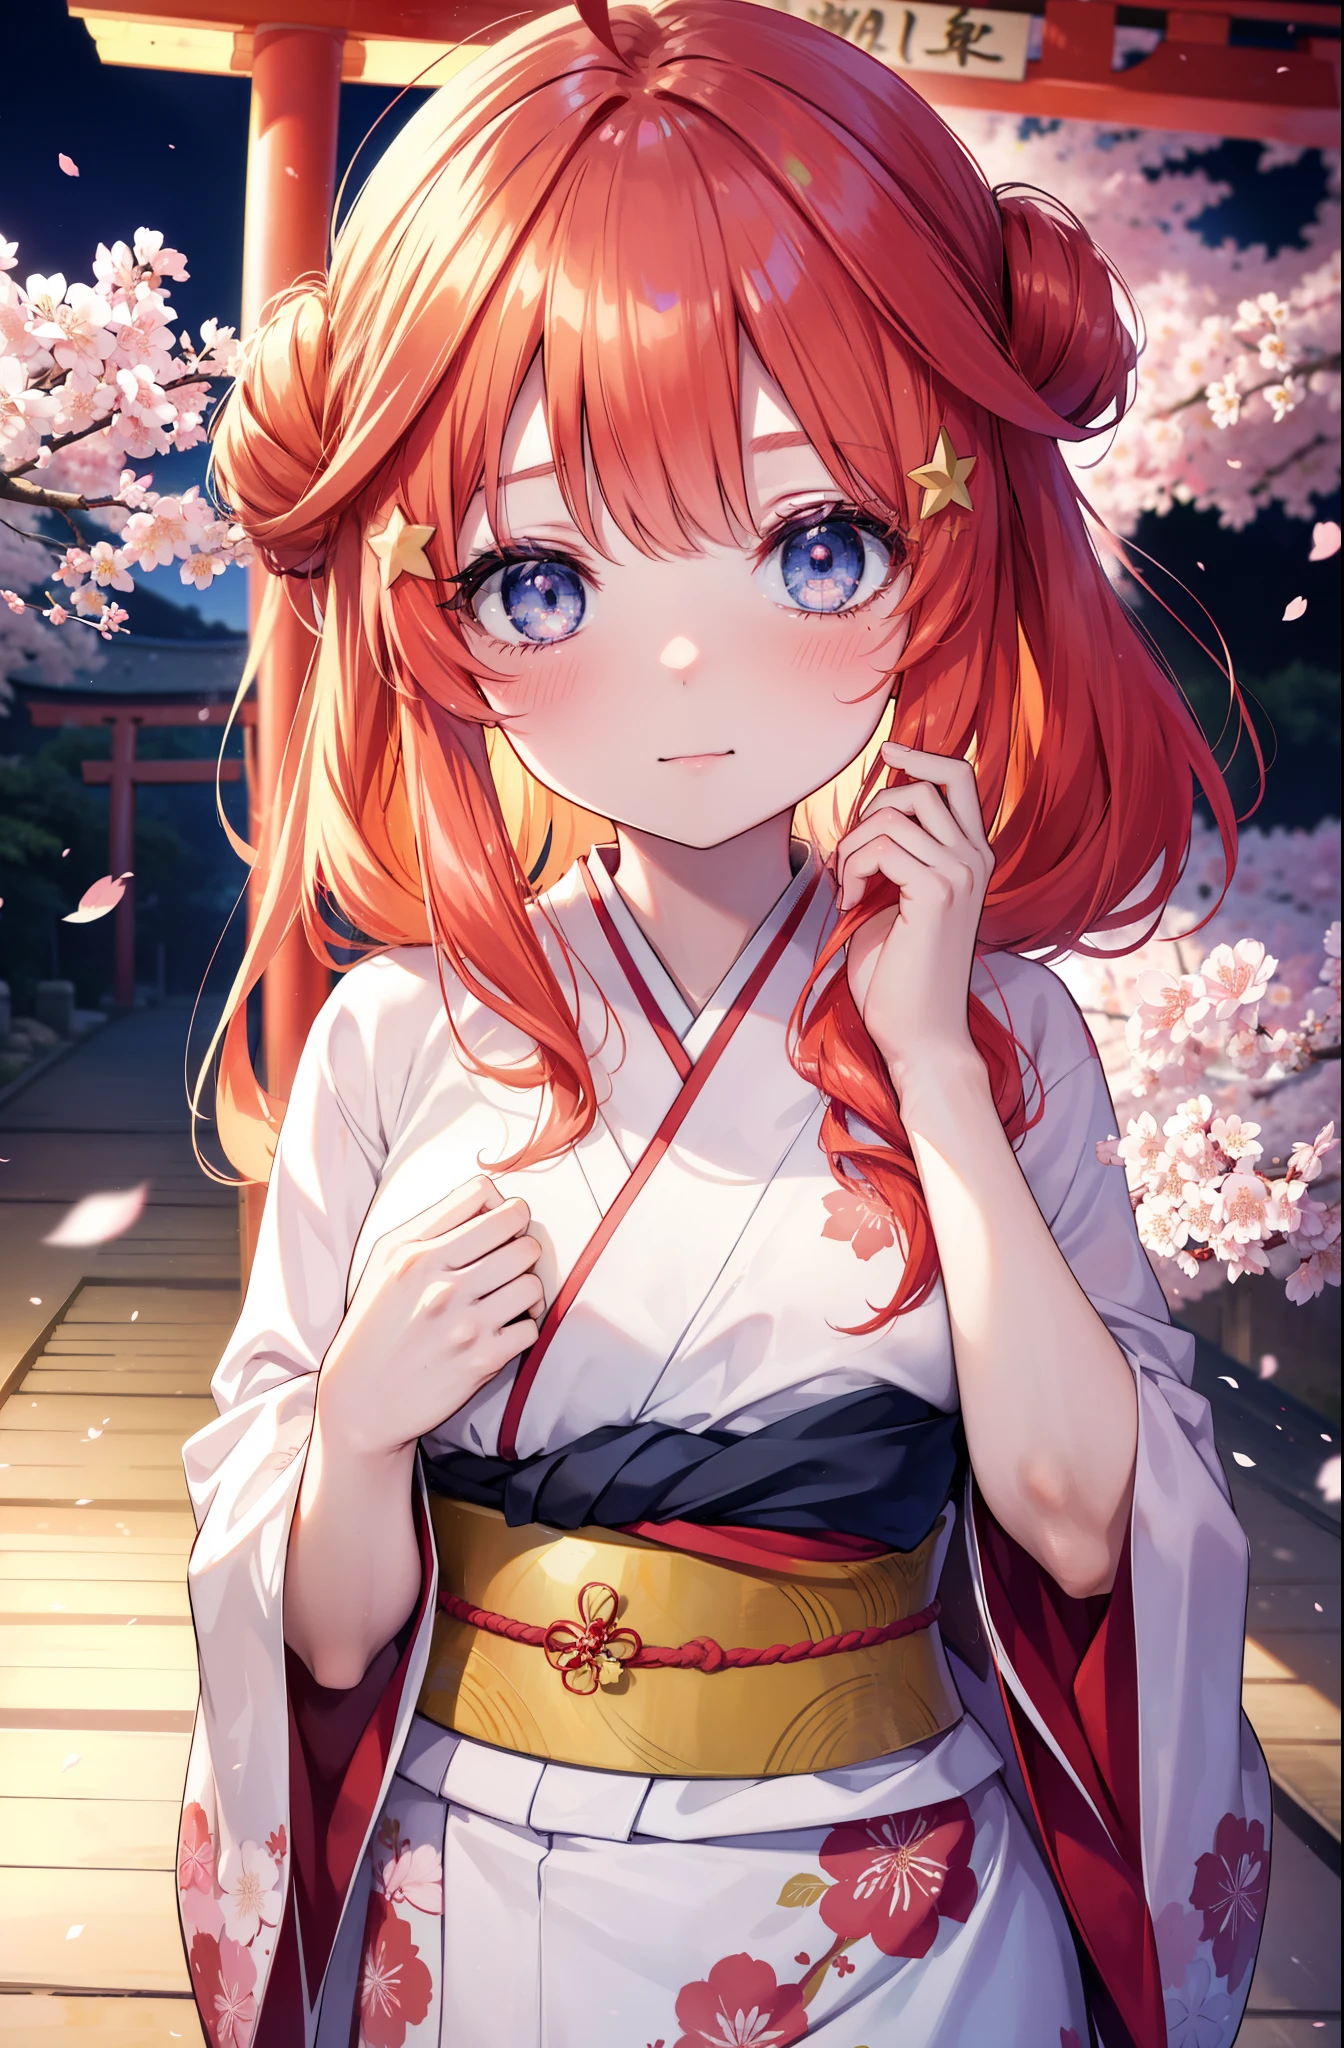 itsukinakano, Itsuki Nakano, bangs, blue eyes, hair between eyes, Ahoge,hair tied back,,long hair, redhead, star \(symbol\), hair ornaments, star hair ornaments,smile,blush,Gorgeous kimono with red floral pattern,white foot bag,Zori cherry blossoms are blooming,Cherry blossoms are scattered,Cherry blossom tree-lined path,Put your hands together and put them on your stomach,
break outdoors, shrine,torii,
break (masterpiece:1.2), highest quality, High resolution, unity 8k wallpaper, (figure:0.8), (detailed and beautiful eyes:1.6), highly detailed face, perfect lighting, Very detailed CG, (perfect hands, perfect anatomy),